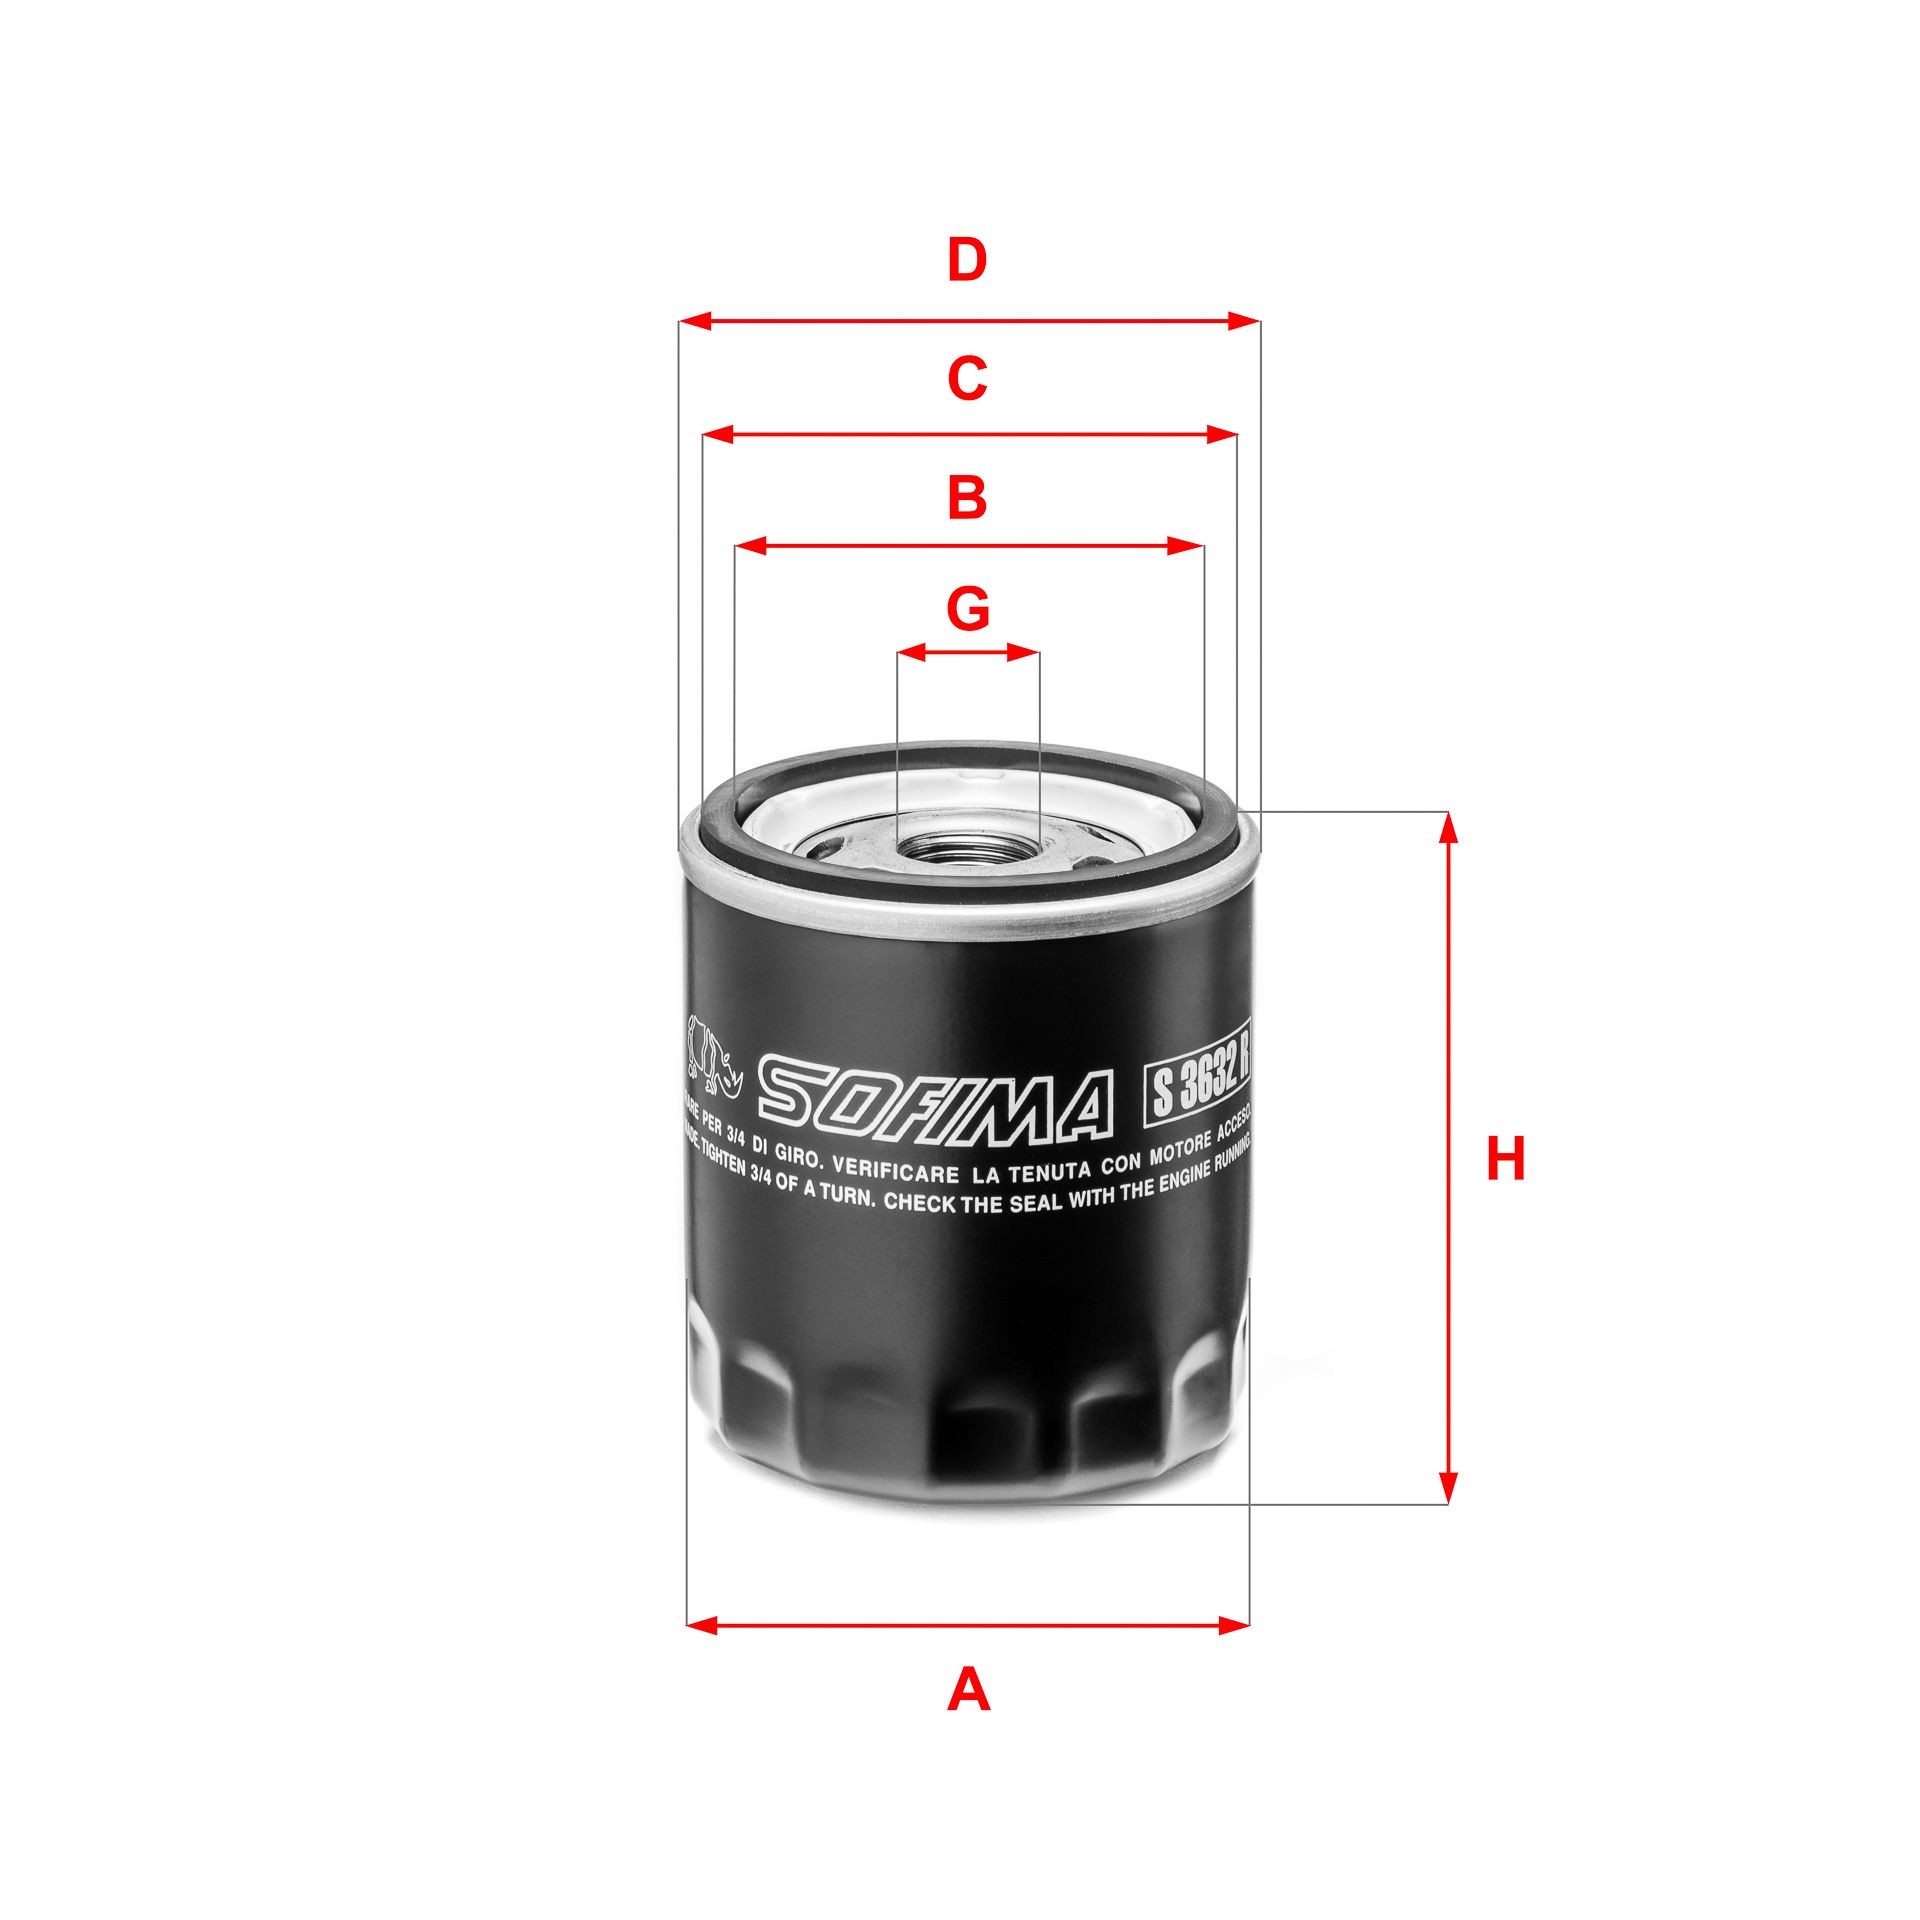 SOFIMA 3/4-16 UNF, Spin-on Filter Inner Diameter 2: 62,5mm, Outer Diameter 2: 71mm, Ø: 76, 78,5mm, Height: 85,5mm Oil filters S 3632 R buy